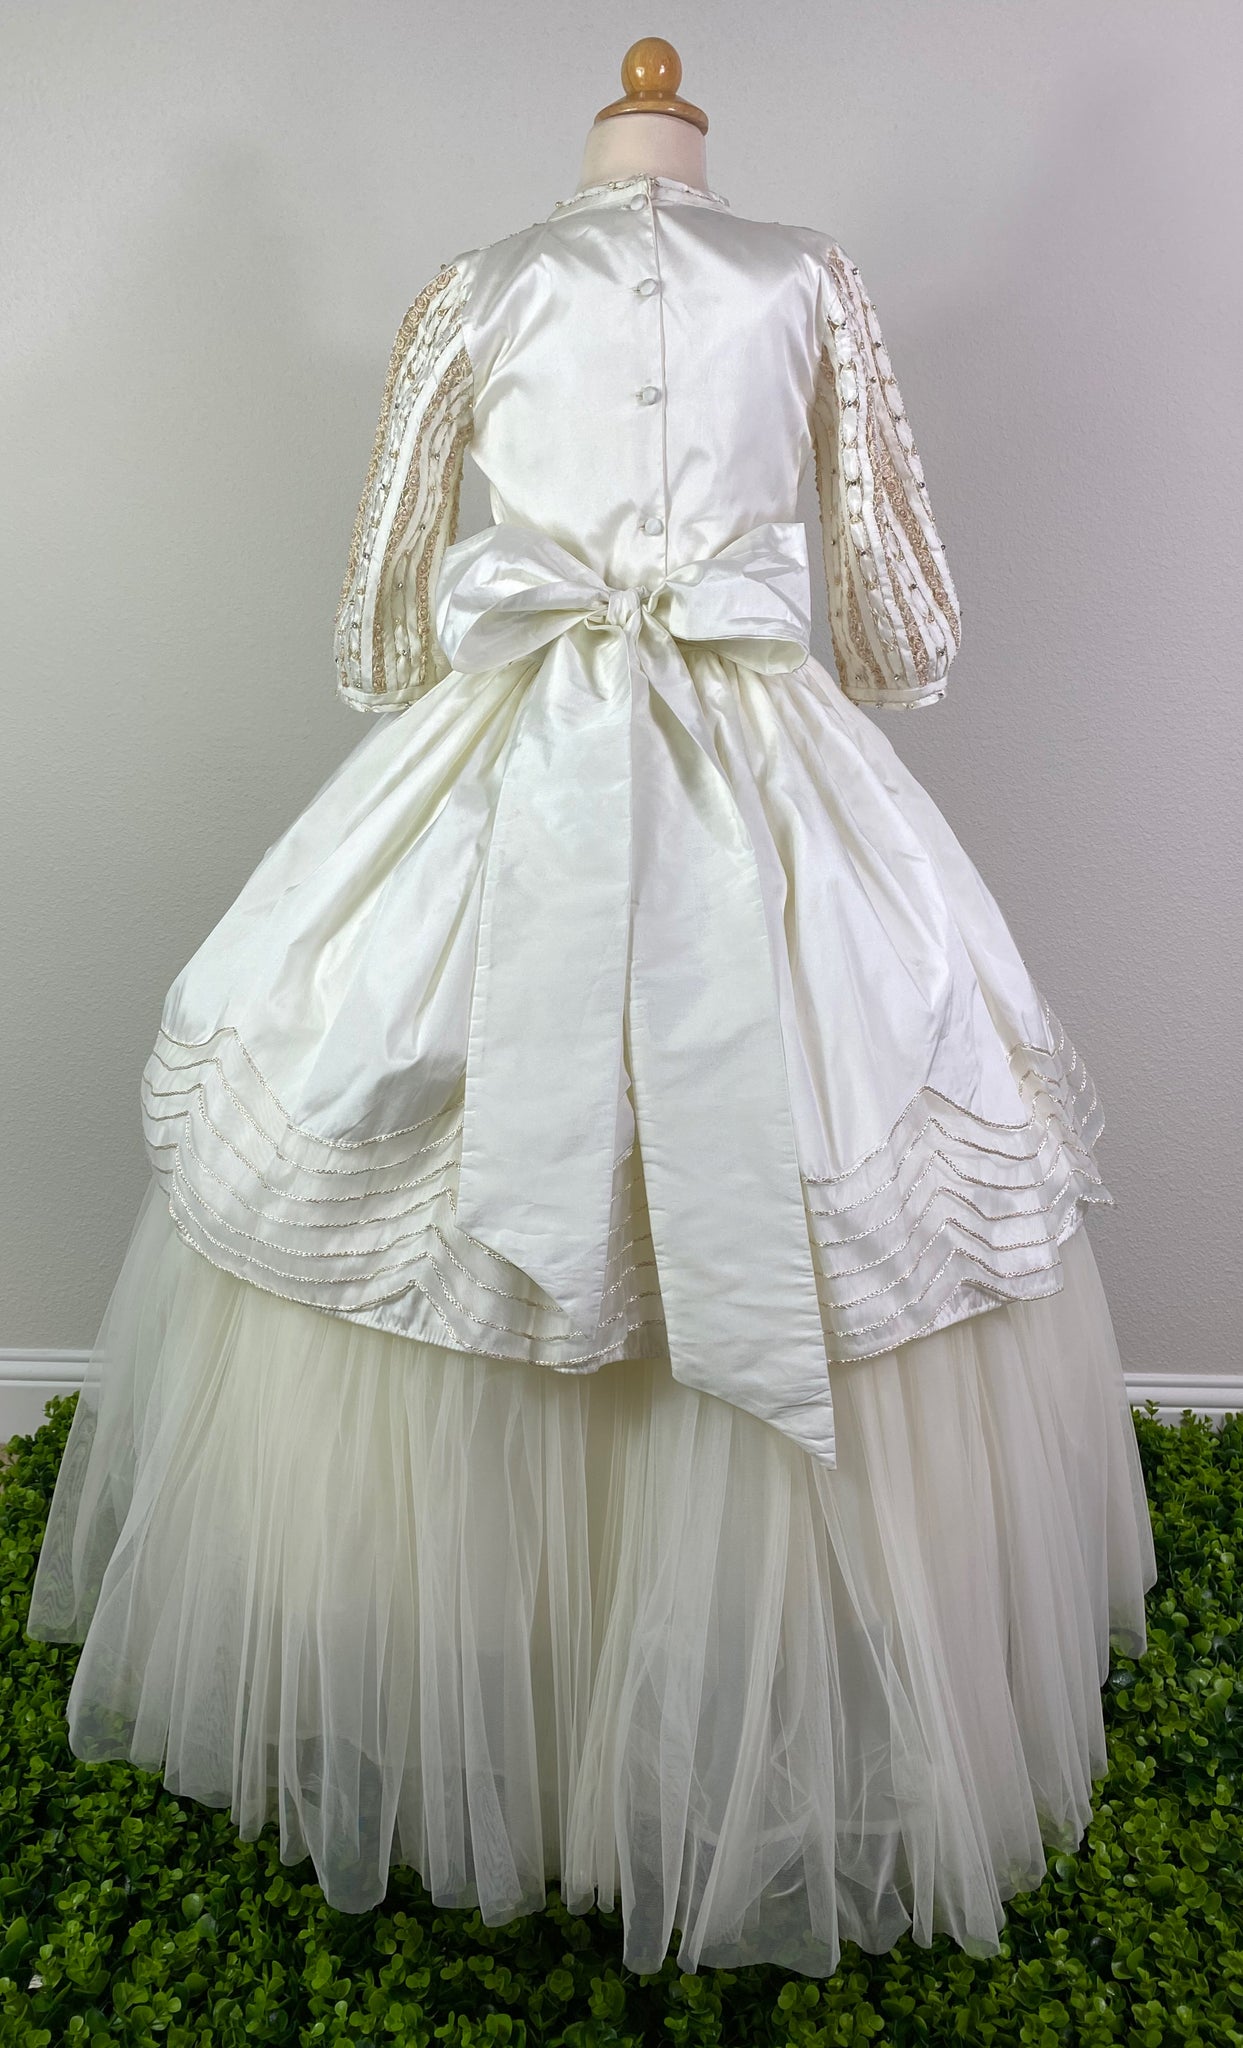 Ivory, size 10 Hand-stitched satin columned 3/4th sleeve Hand stitched satin columns with floral paneled bodice Ruched ivory cummerbund with large ivory ruffled bow Scalloped braided trim along edge of top skirt Floral detailing on under dress tulle Detachable dress for long dress or short dress Ivory Satin covered button closure Ivory Satin ribbon for large bow